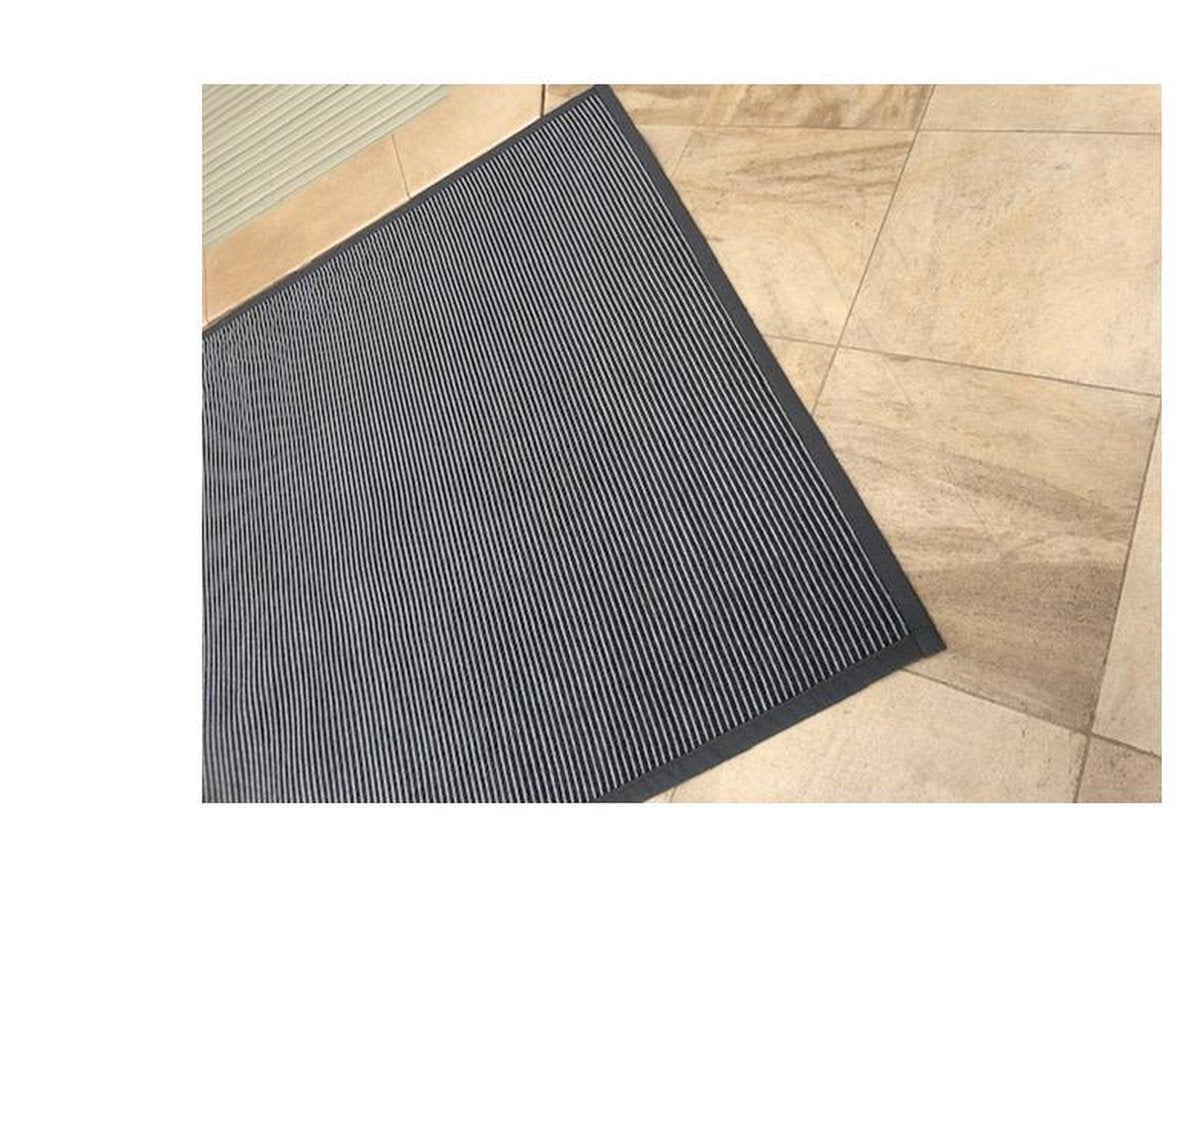 Exclusive Rug Viva recto verso - two-sided rug - free anti-slip included - gray gray - 160/230 cm - carpet - striped and herringbone